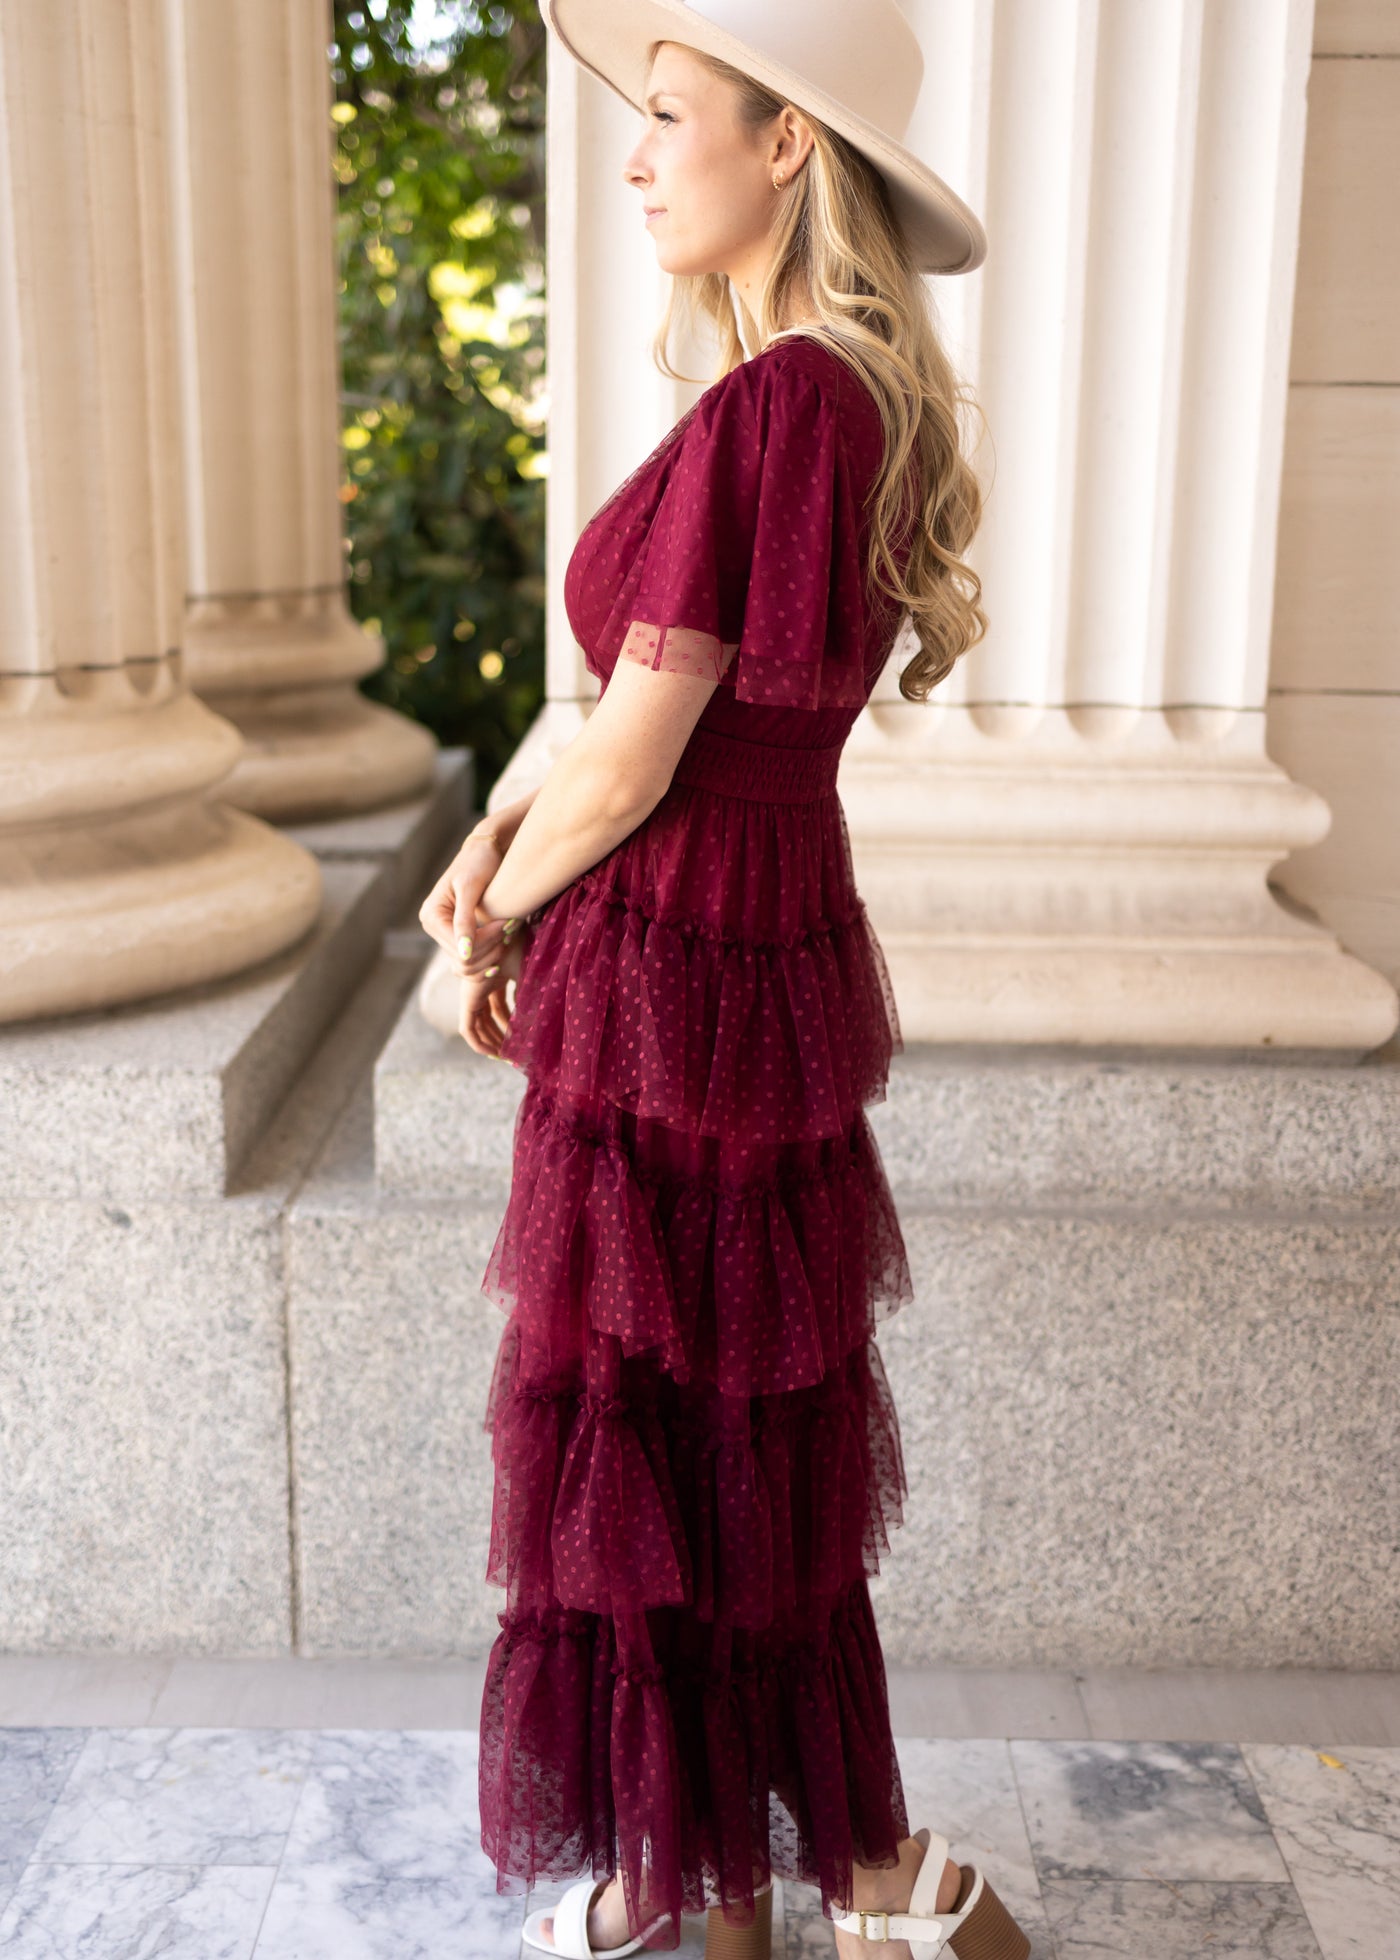 Side view of a short sleeve burgundy dress with a ruffle skirt